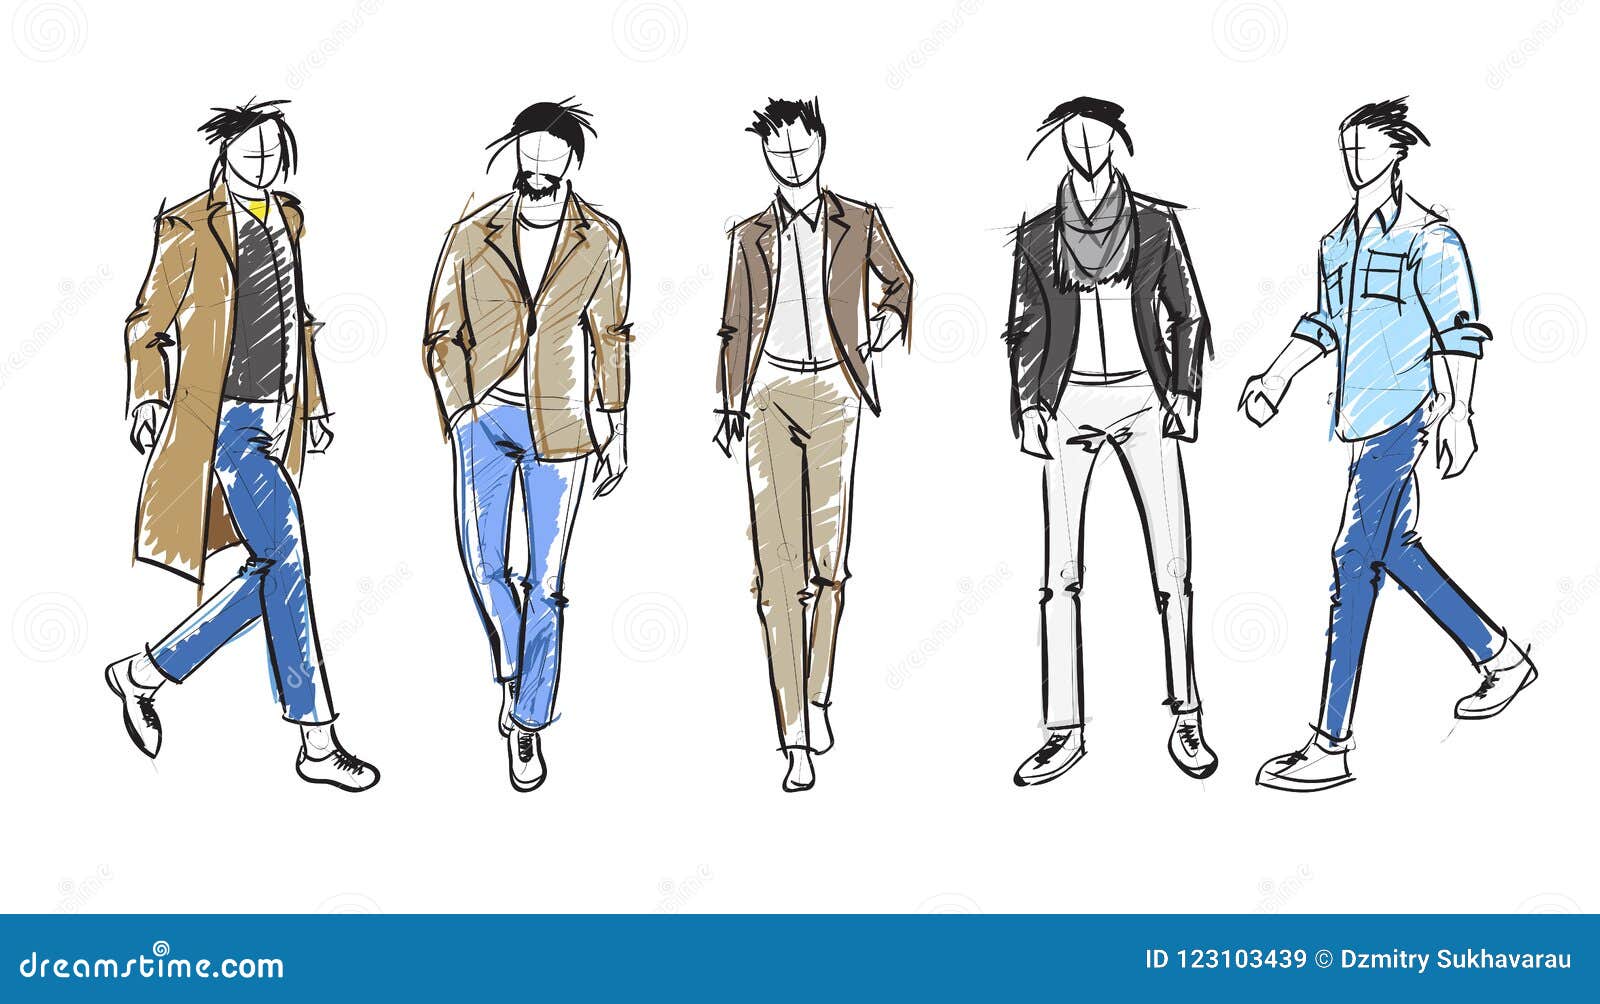 Fashion Sketch Men Cliparts, Stock Vector and Royalty Free Fashion Sketch  Men Illustrations